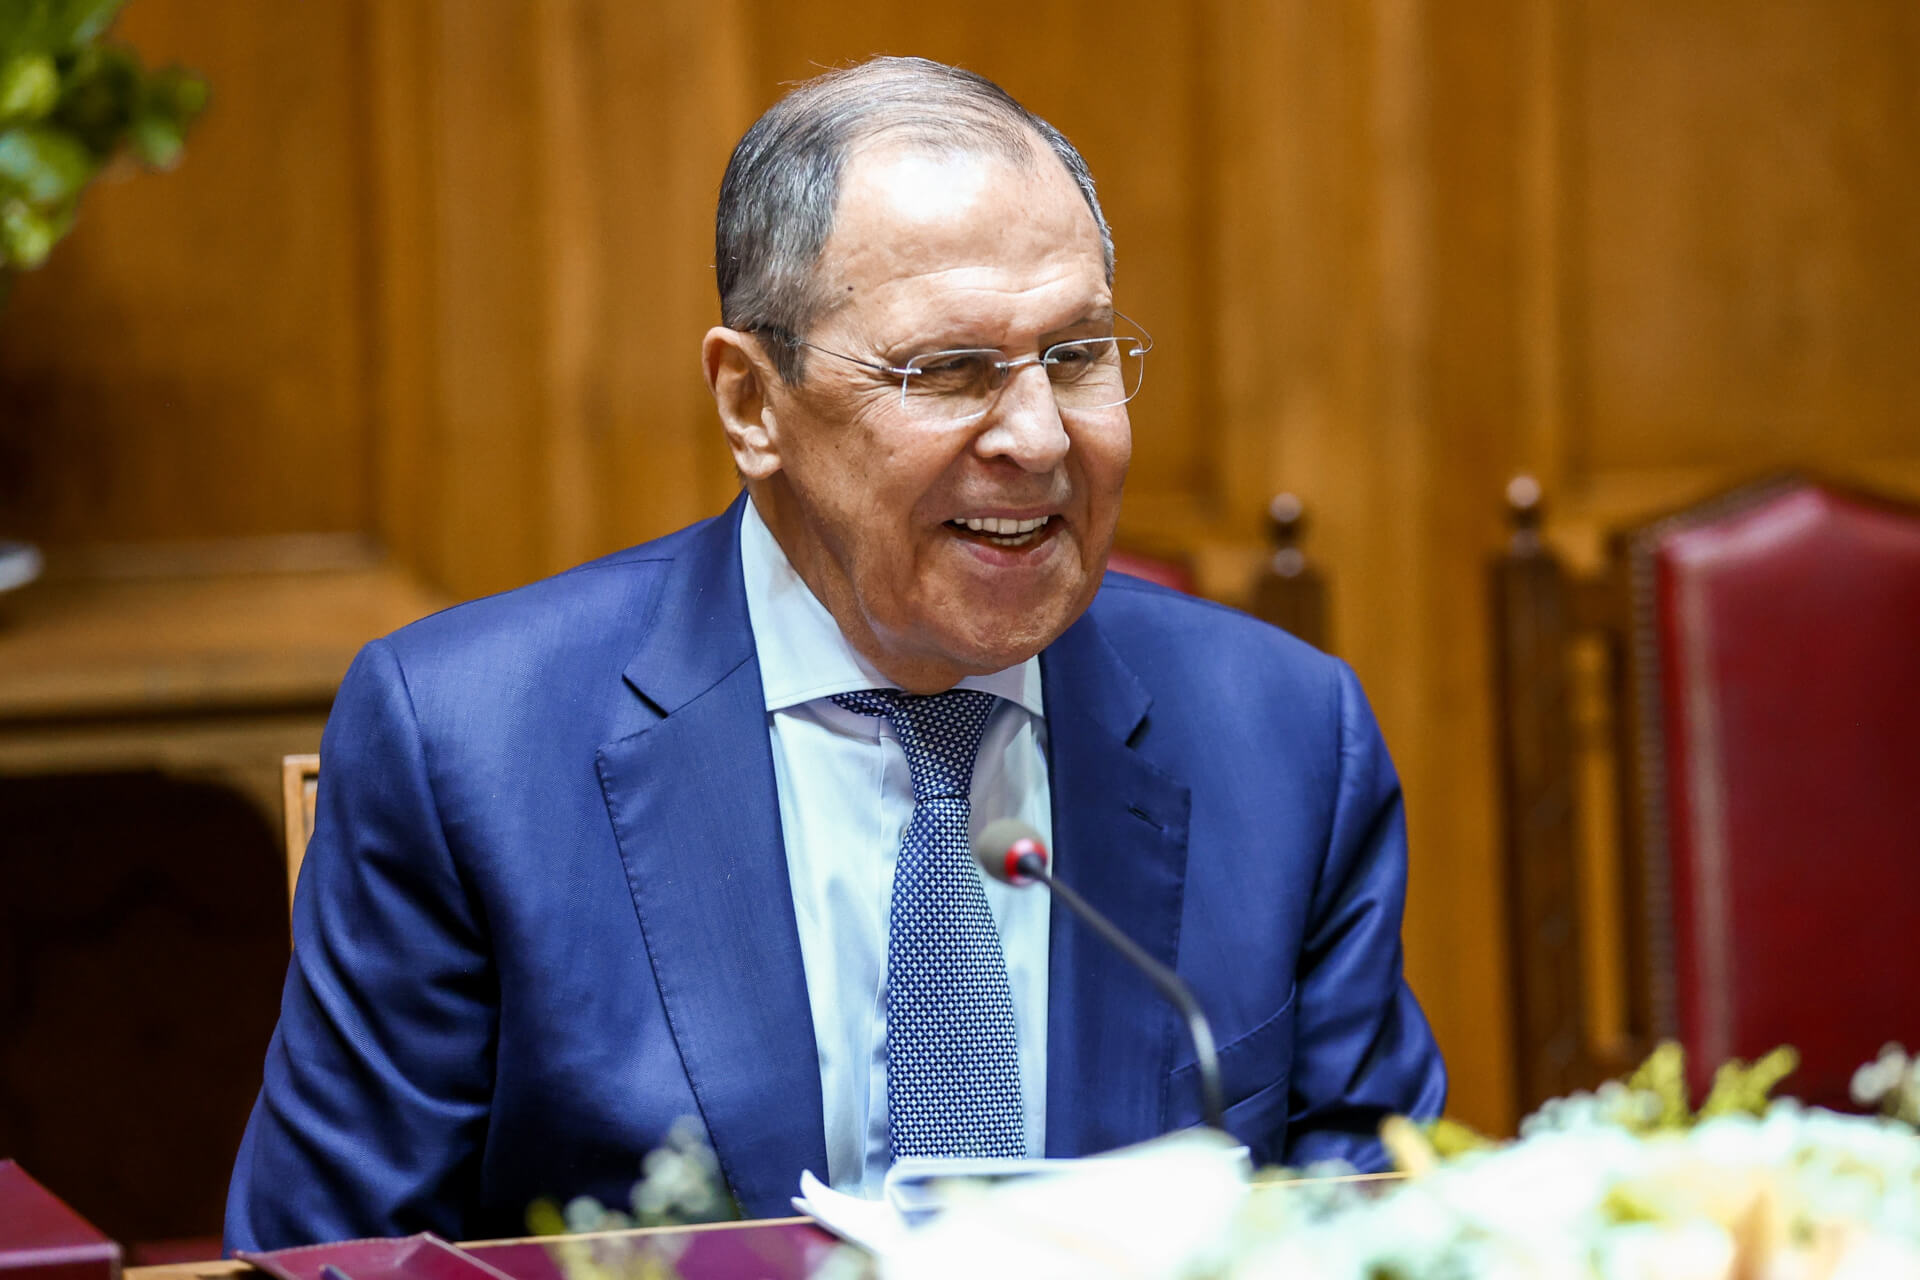 Russian FM Lavrov Accuses Ukraine of Seeking Biological Weapons, Supporting Nazis